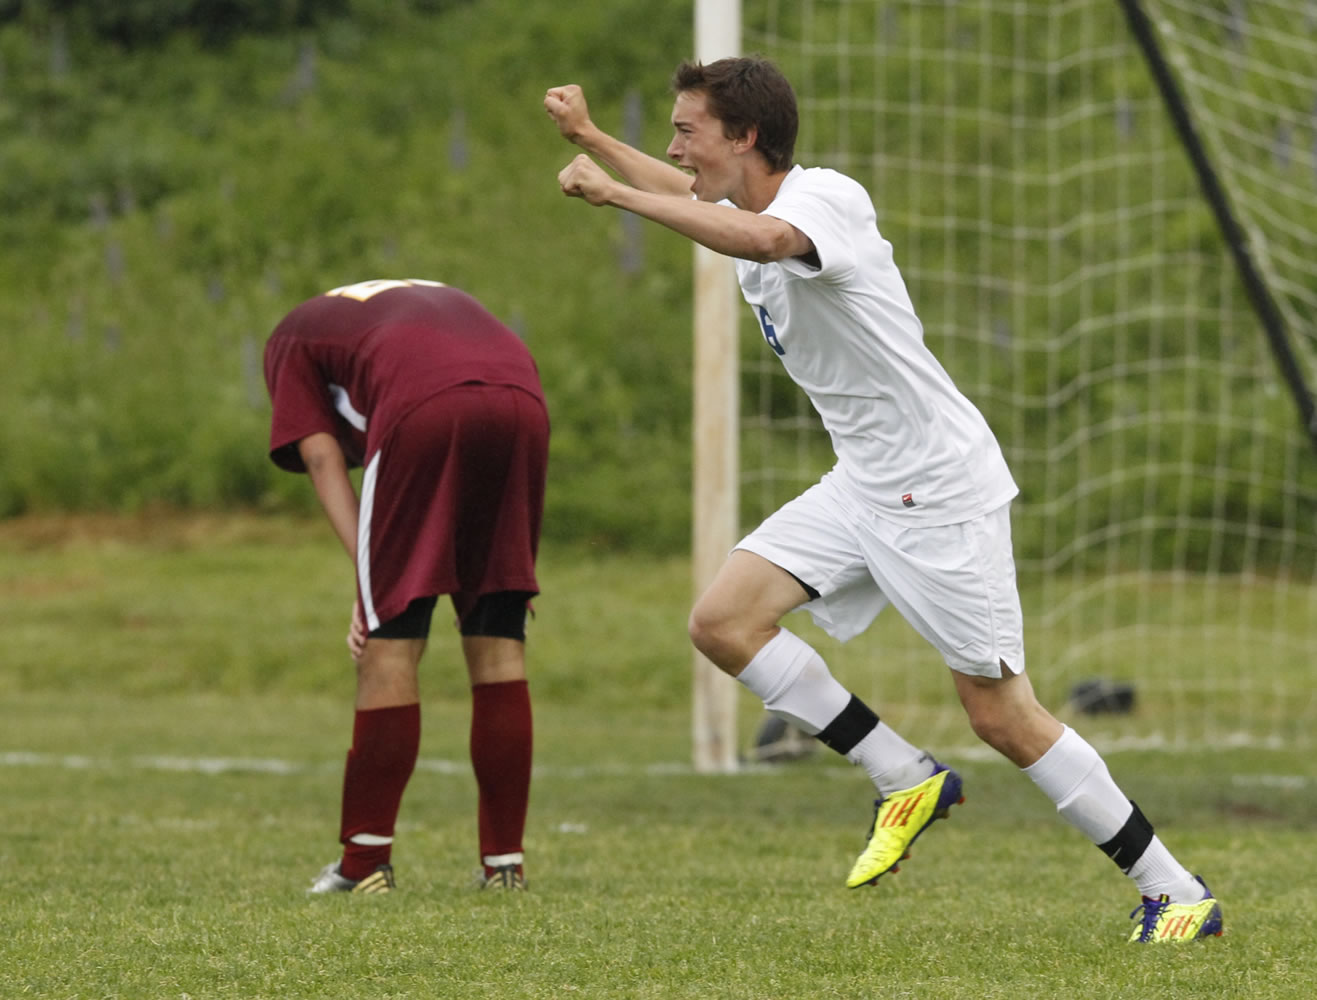 Steve Dipaola/For The Columbian
Ridgefield forward Chase Majury reacts to goal against Kingston during 2A soccer playoff game Wednesday.  Steve Dipaola for the Columbian.